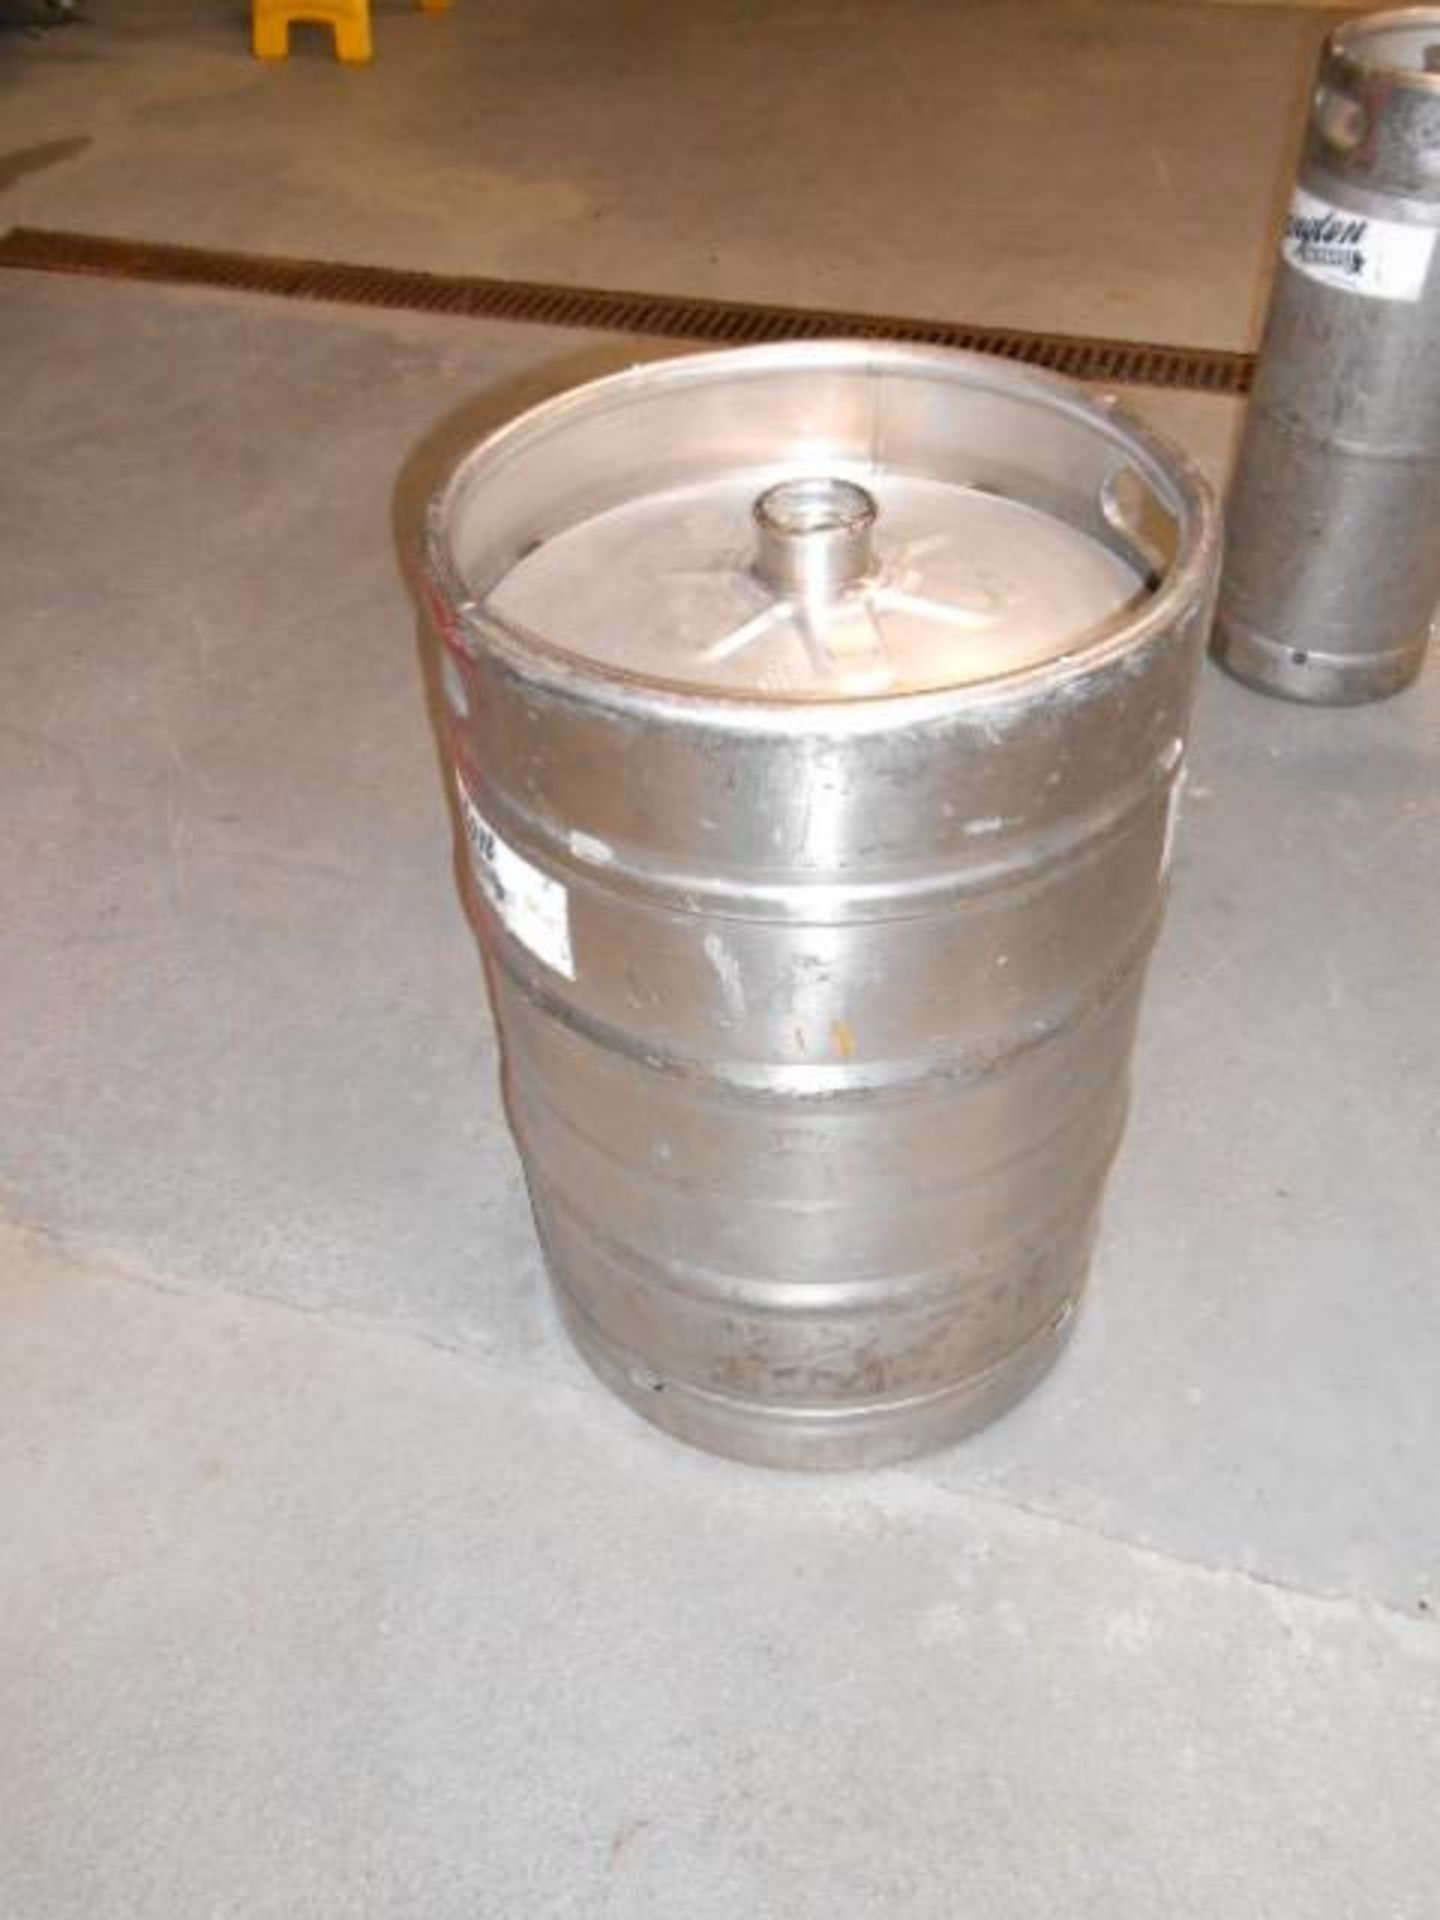 LOT of 24 1/2 barrel keg, Sanke connection ***NOTE FROM AUCTIONEER*** Rigging and Loading fee of